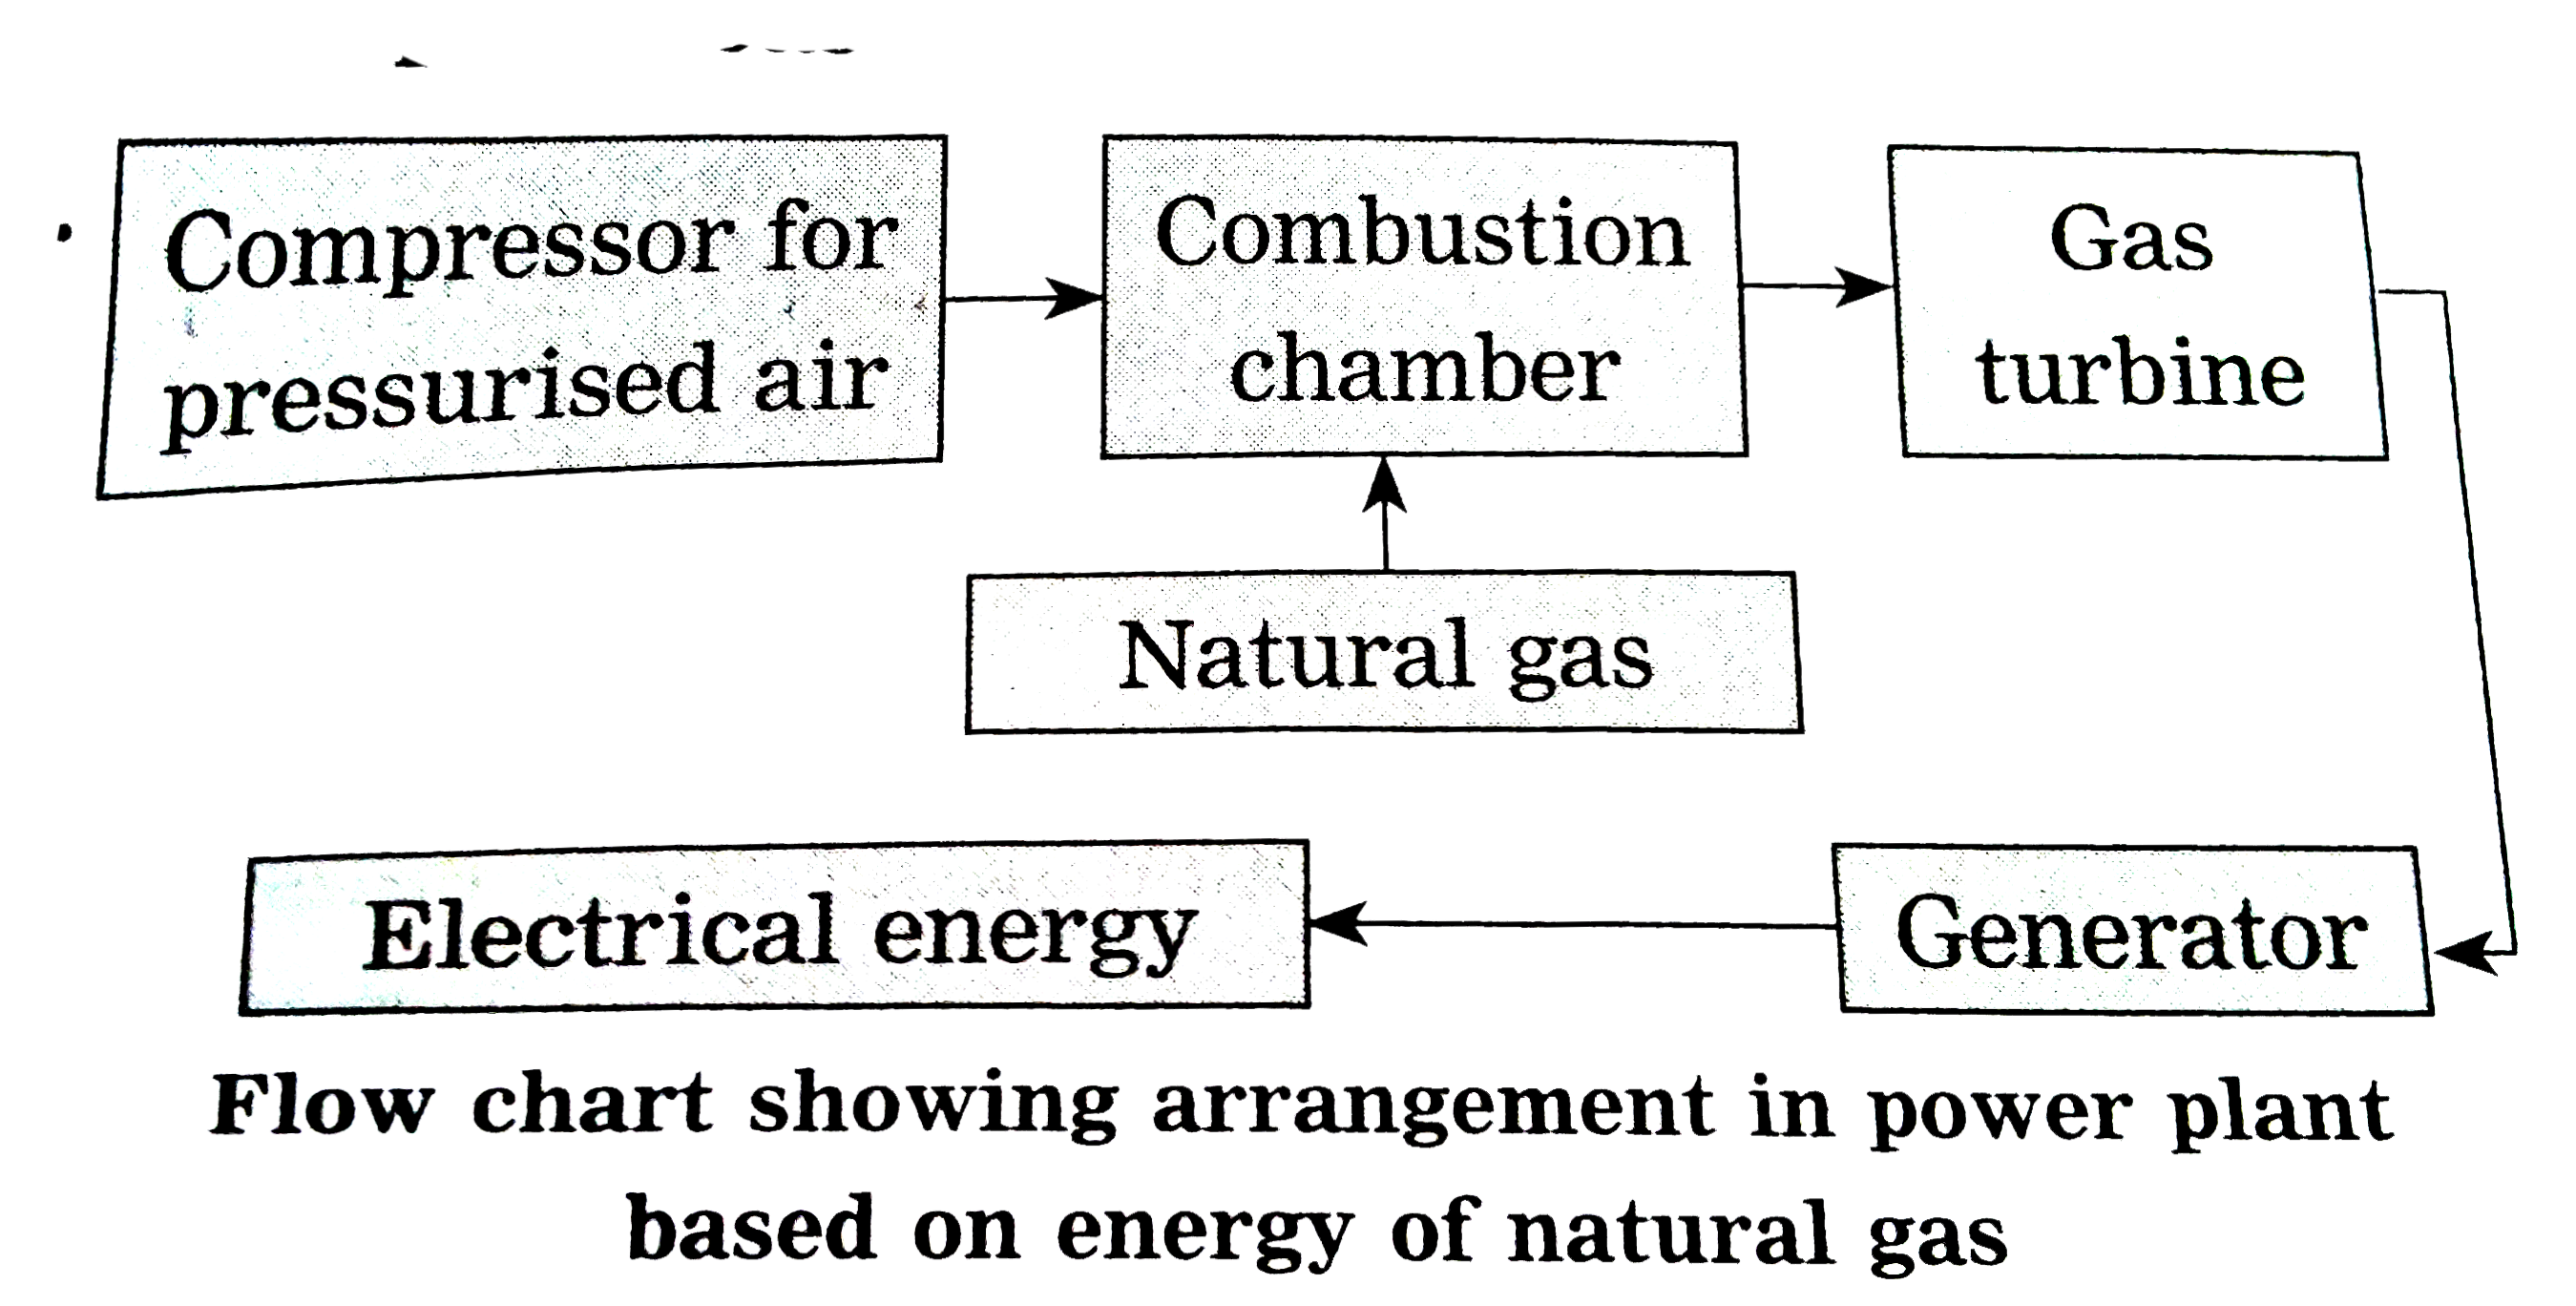 explain-with-diagram-step-by-step-energy-conversion-in-power-plant-based-on-natural-gas